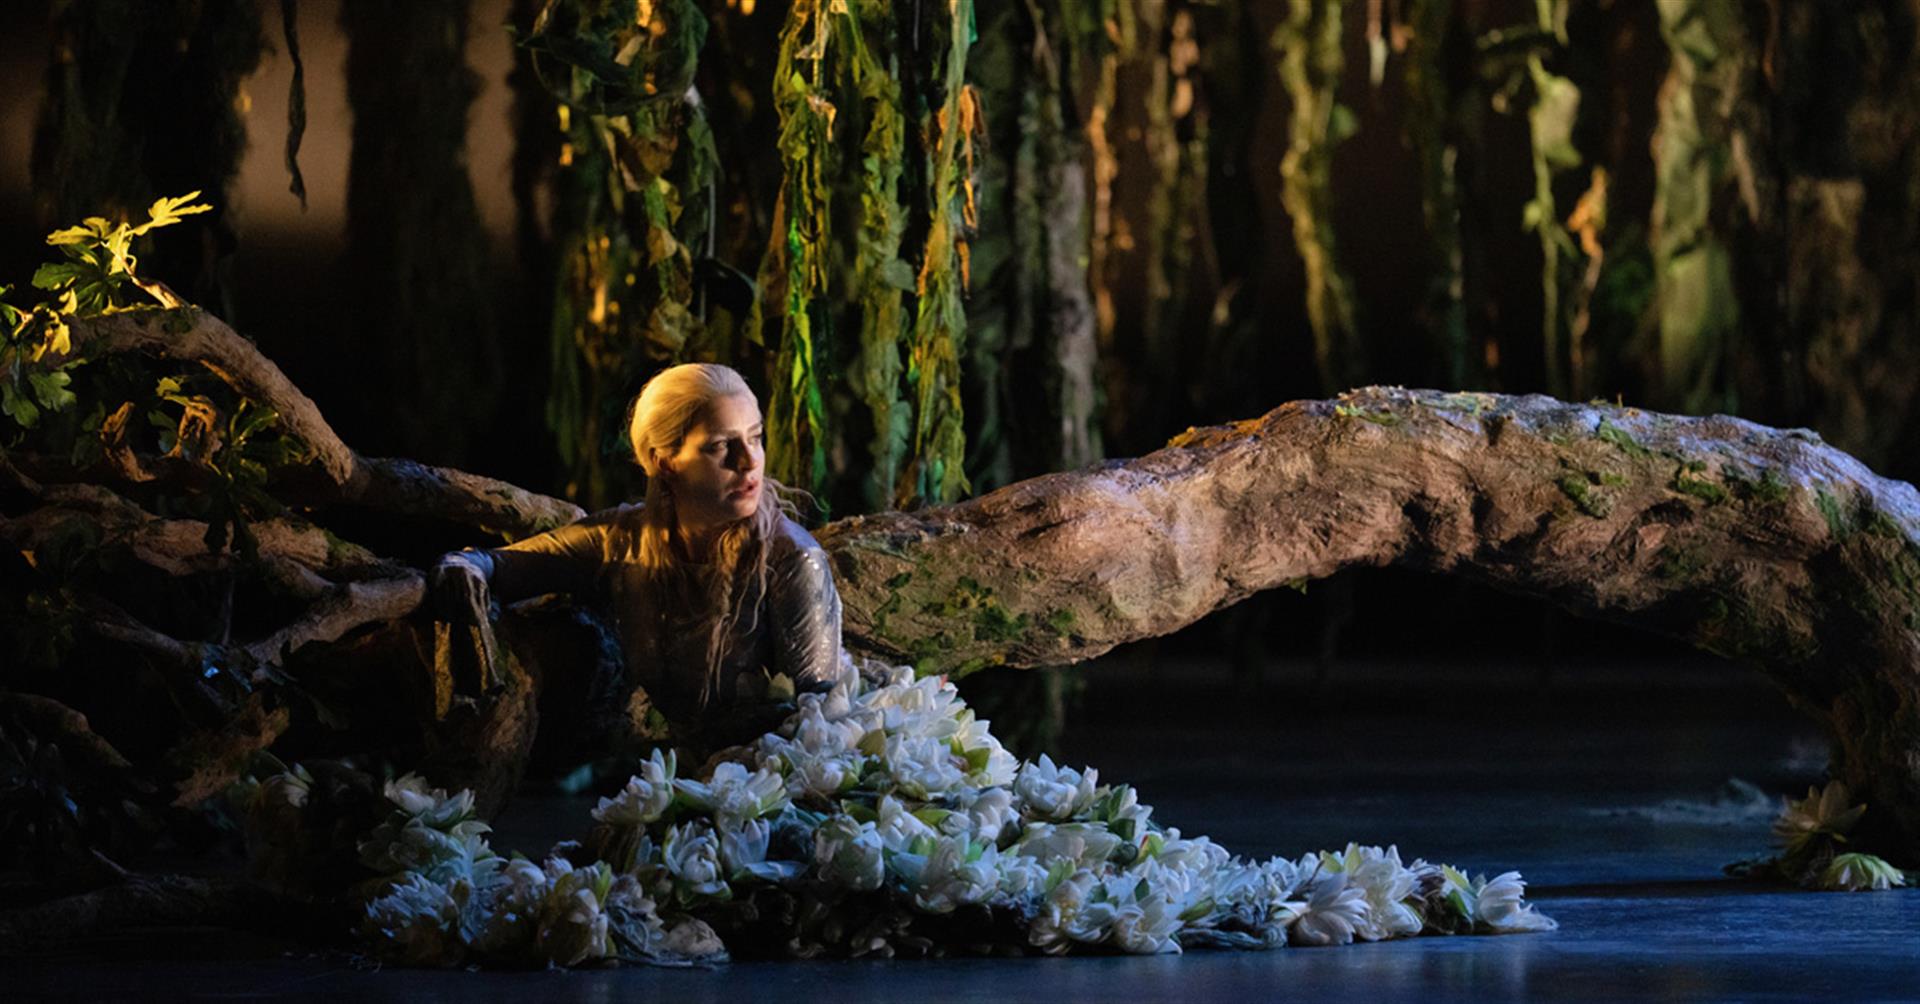 The Royal Opera: Rusalka (12A) - Lowther Pavilion